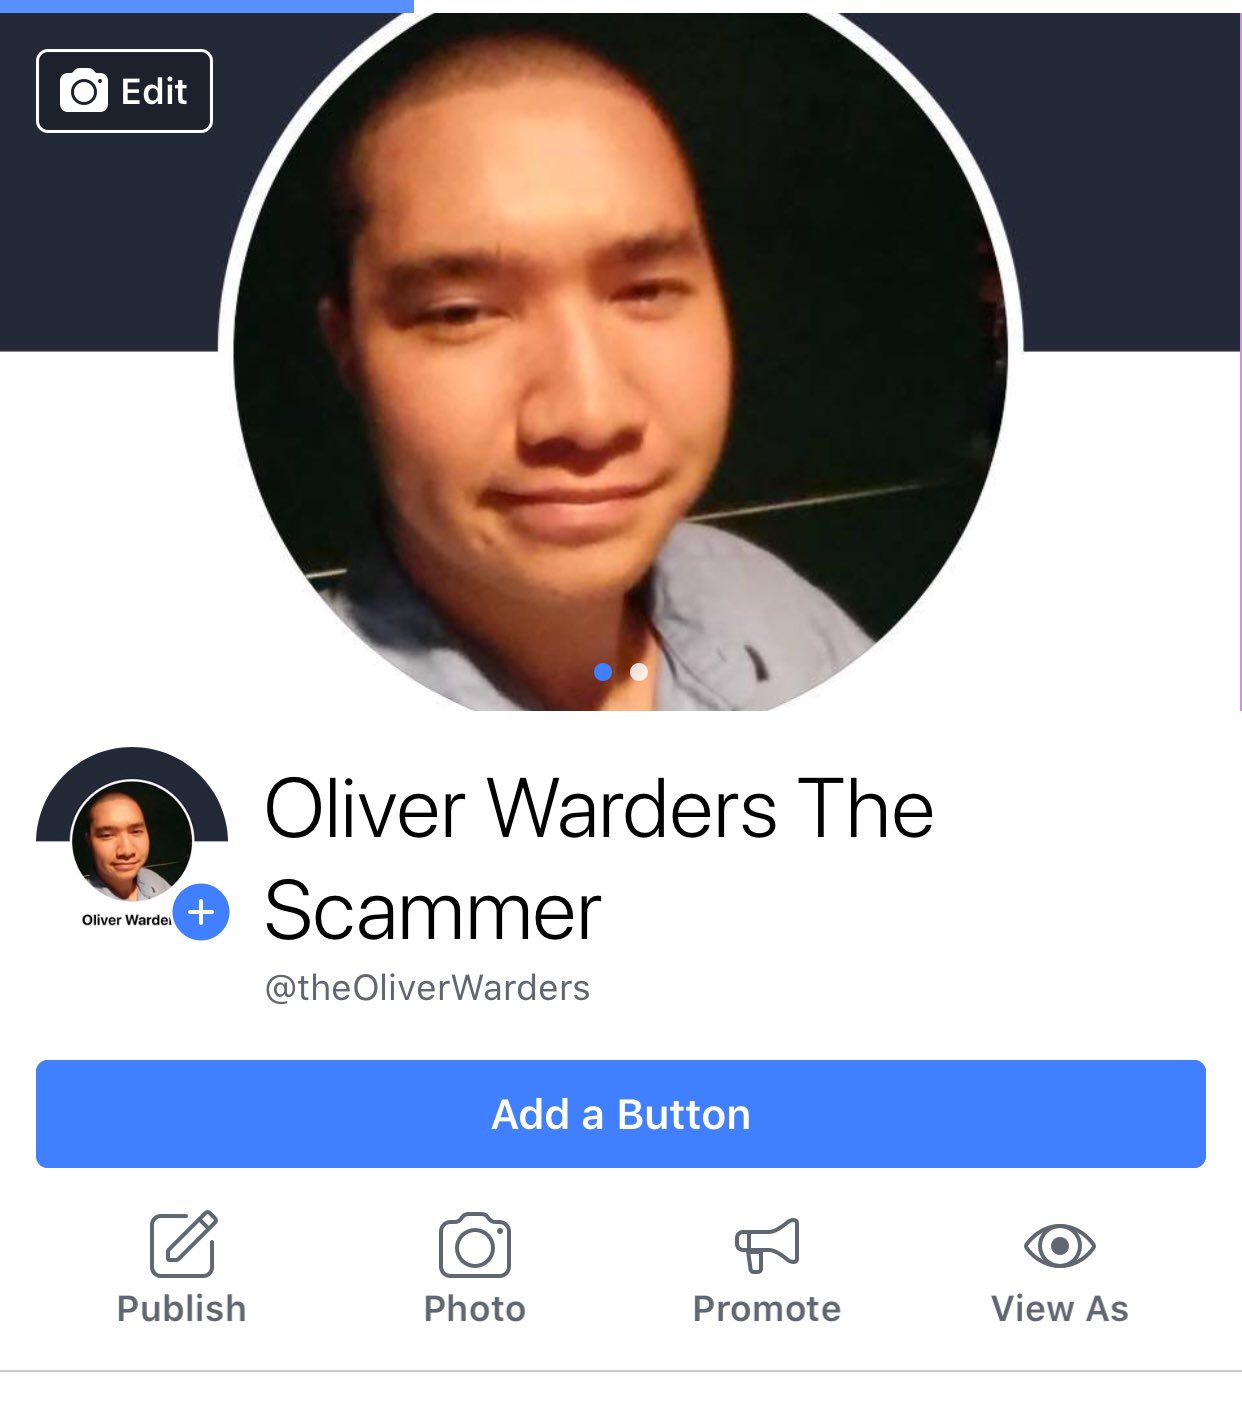 OLIVER WARDERS THE BLACKMAILER